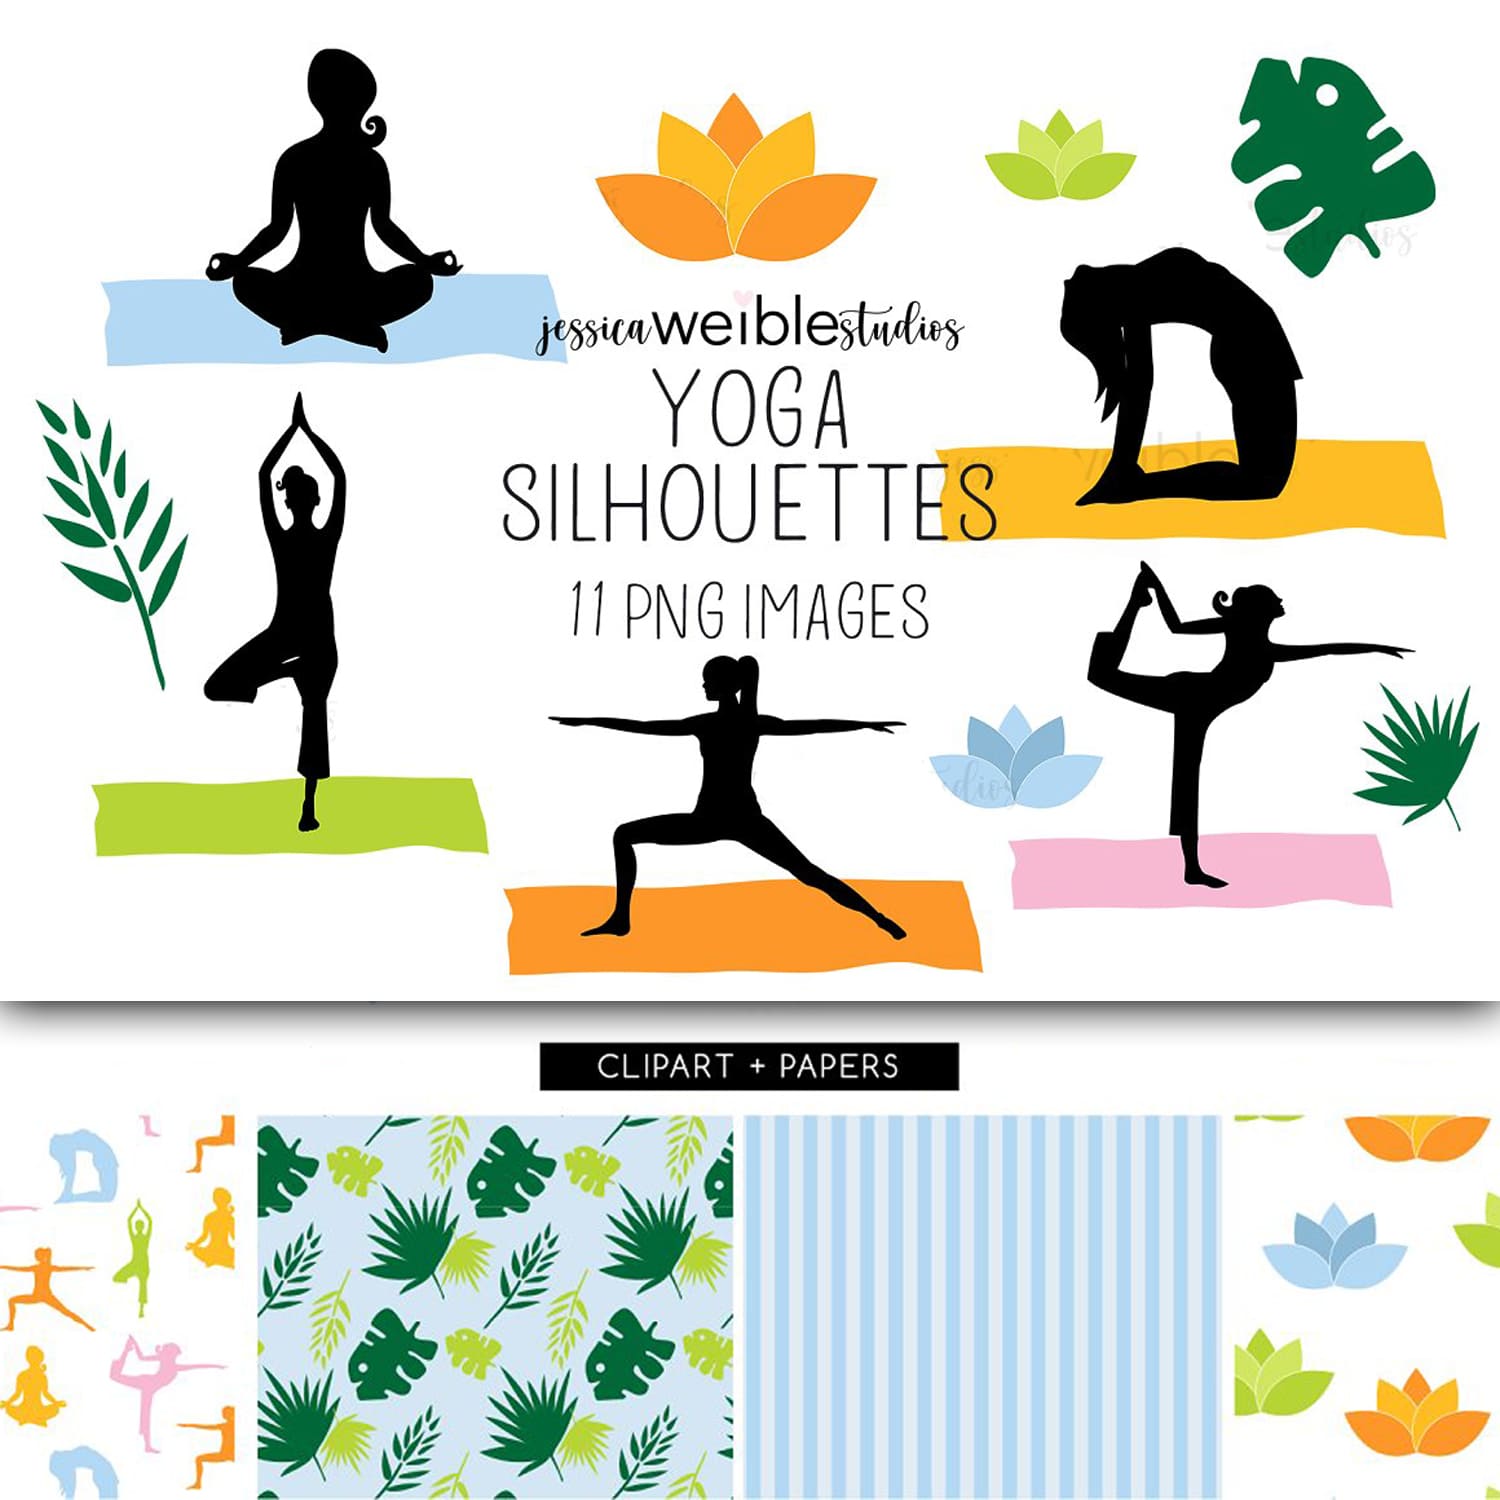 Yoga Silhouettes created by Jessica Weible Studios.